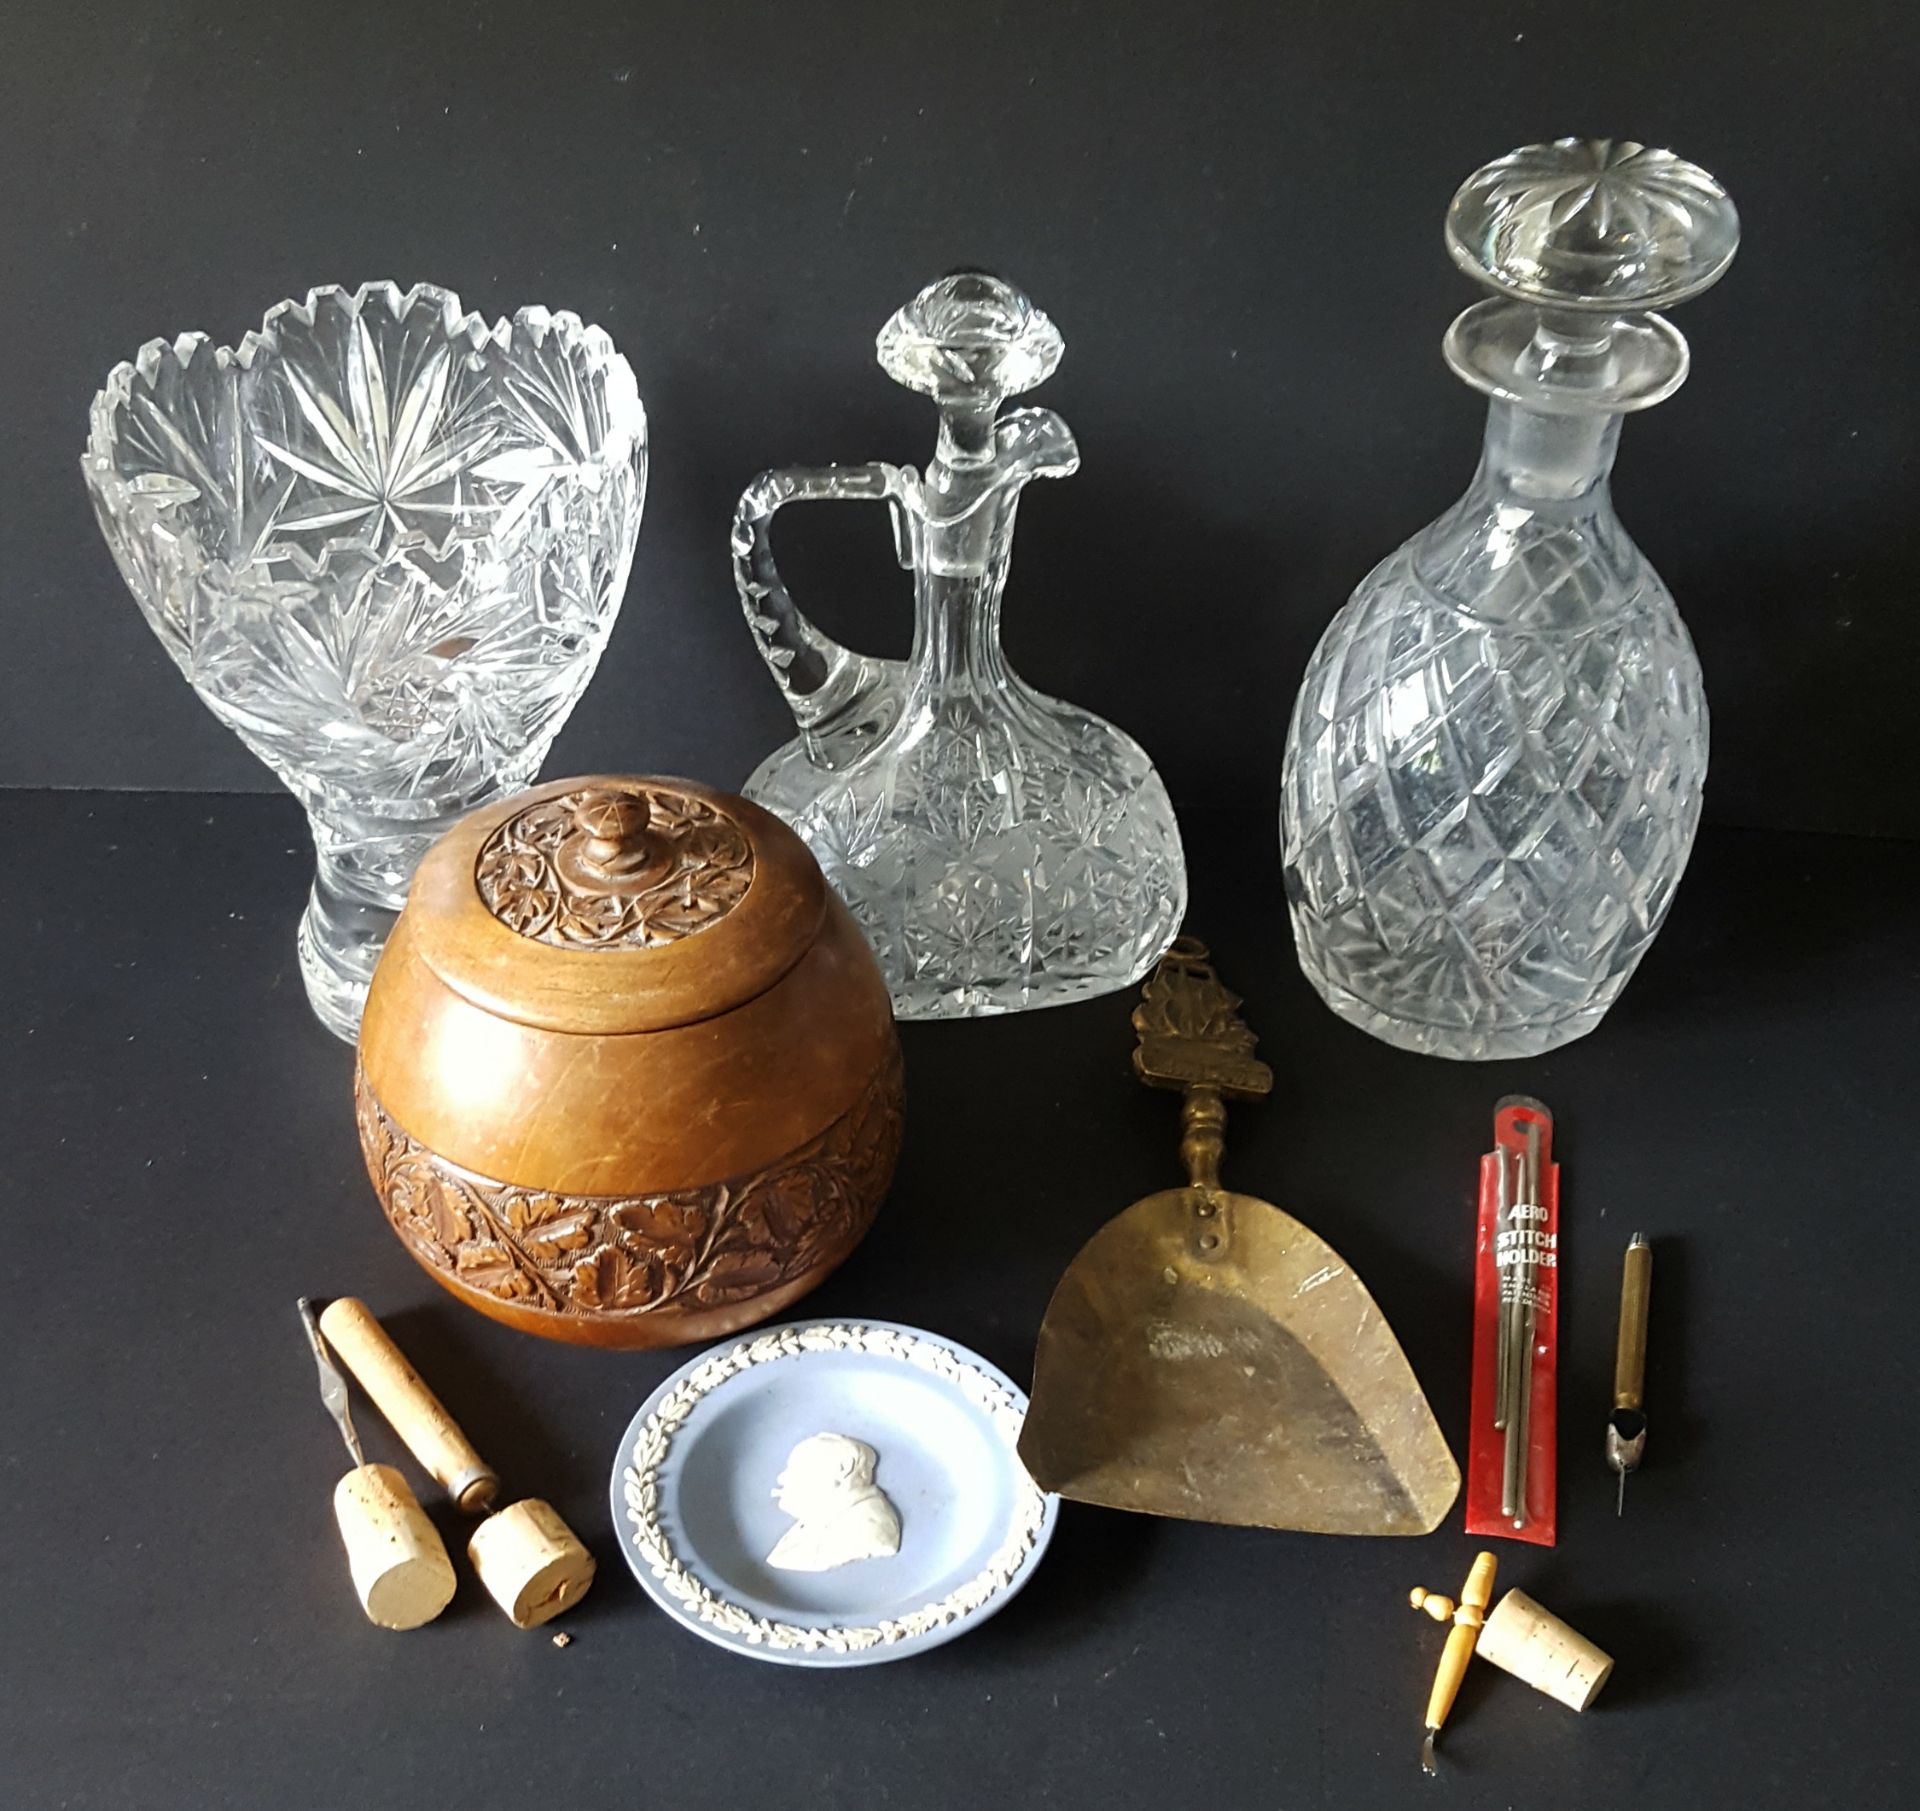 Vintage Retro Parcel of Decanters Wedgwood Brass Lace Work Tools & Treen - No Reserve